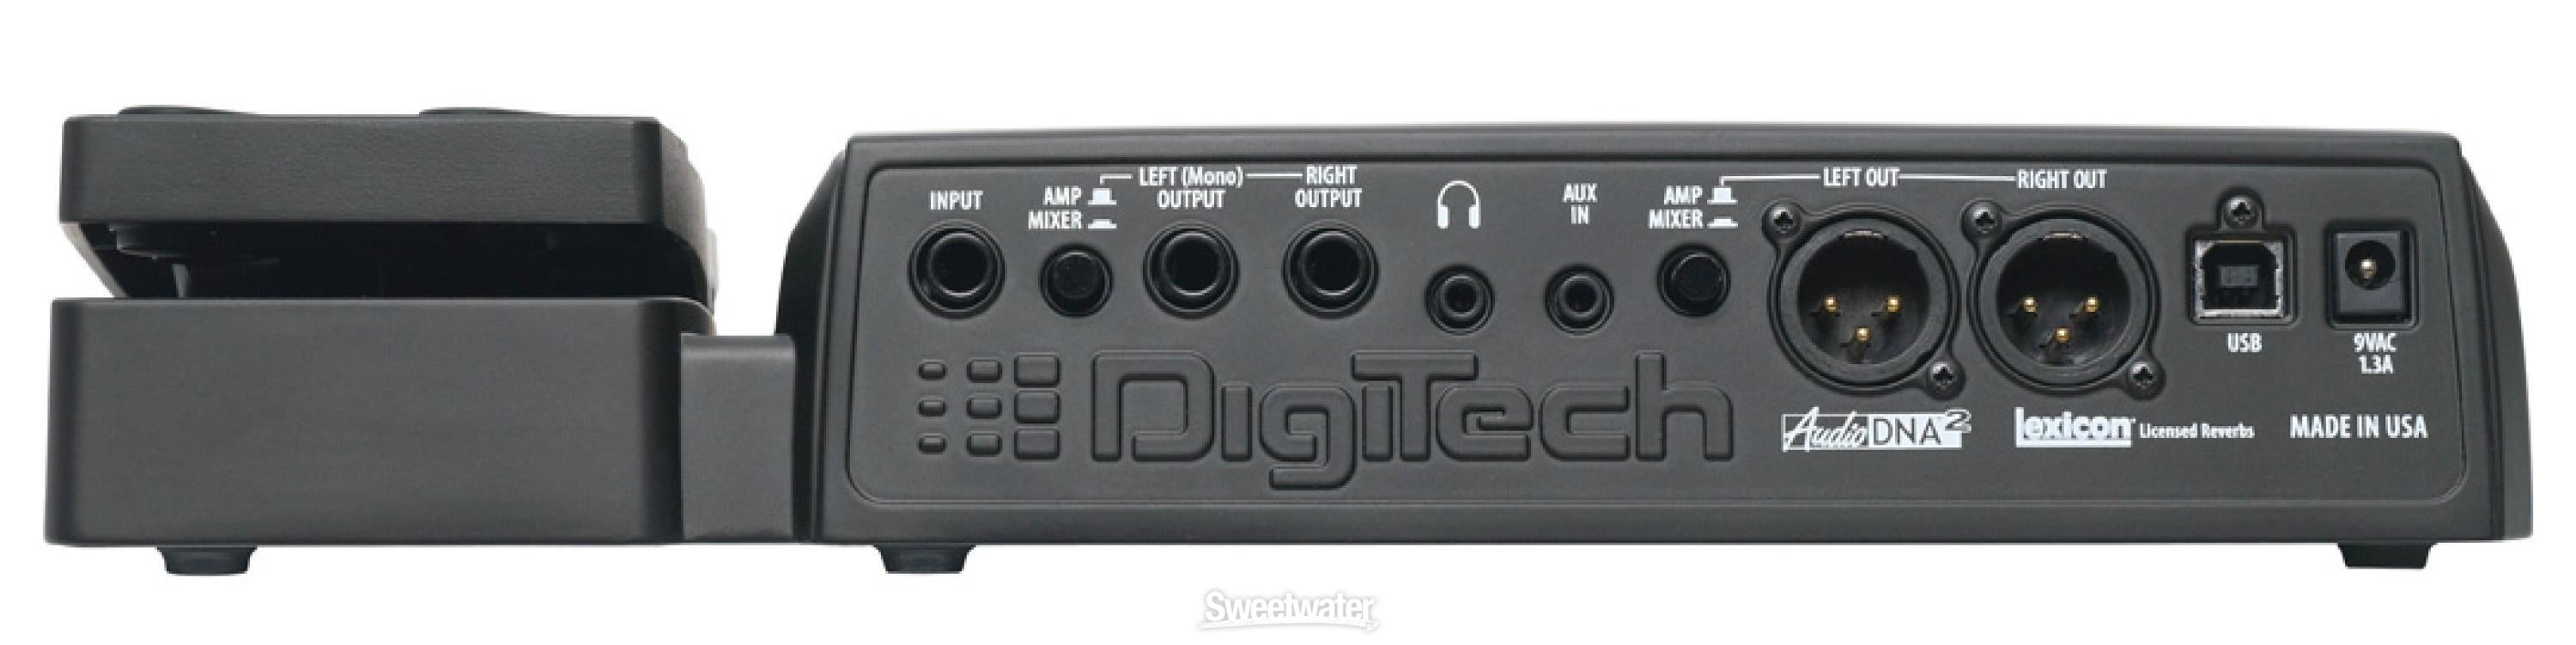 DigiTech RP355 Guitar Multi Effects Pedal with Expression Pedal